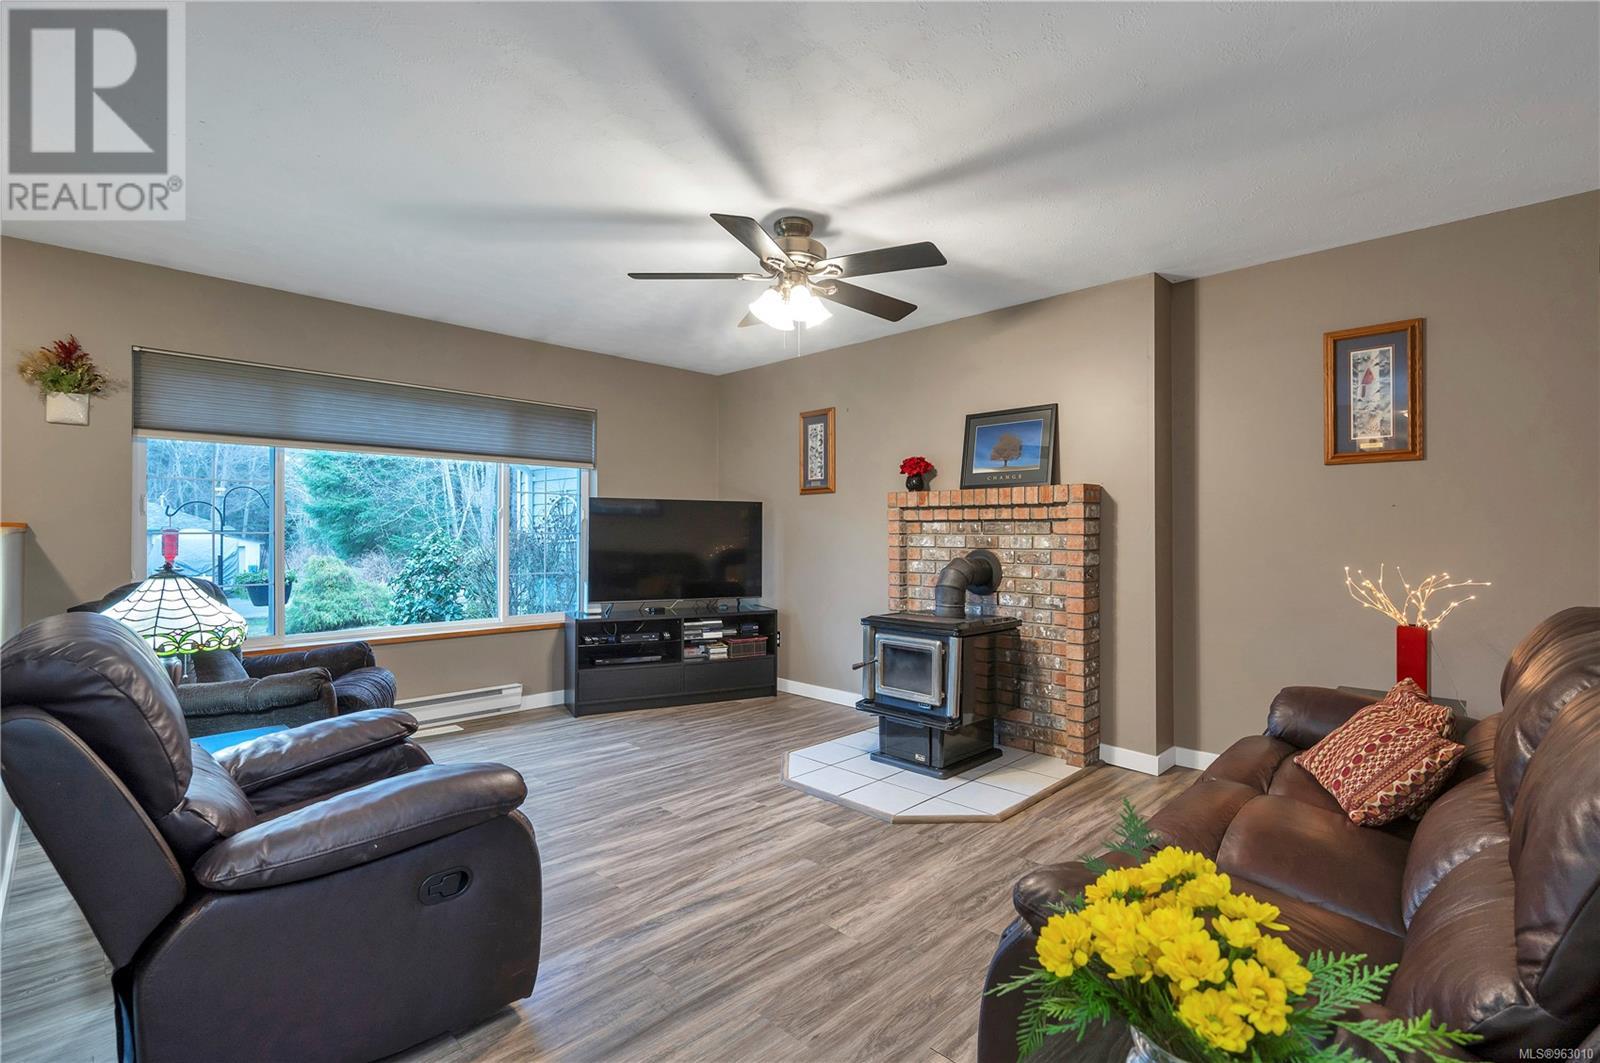 4199 Enquist Rd, Campbell River